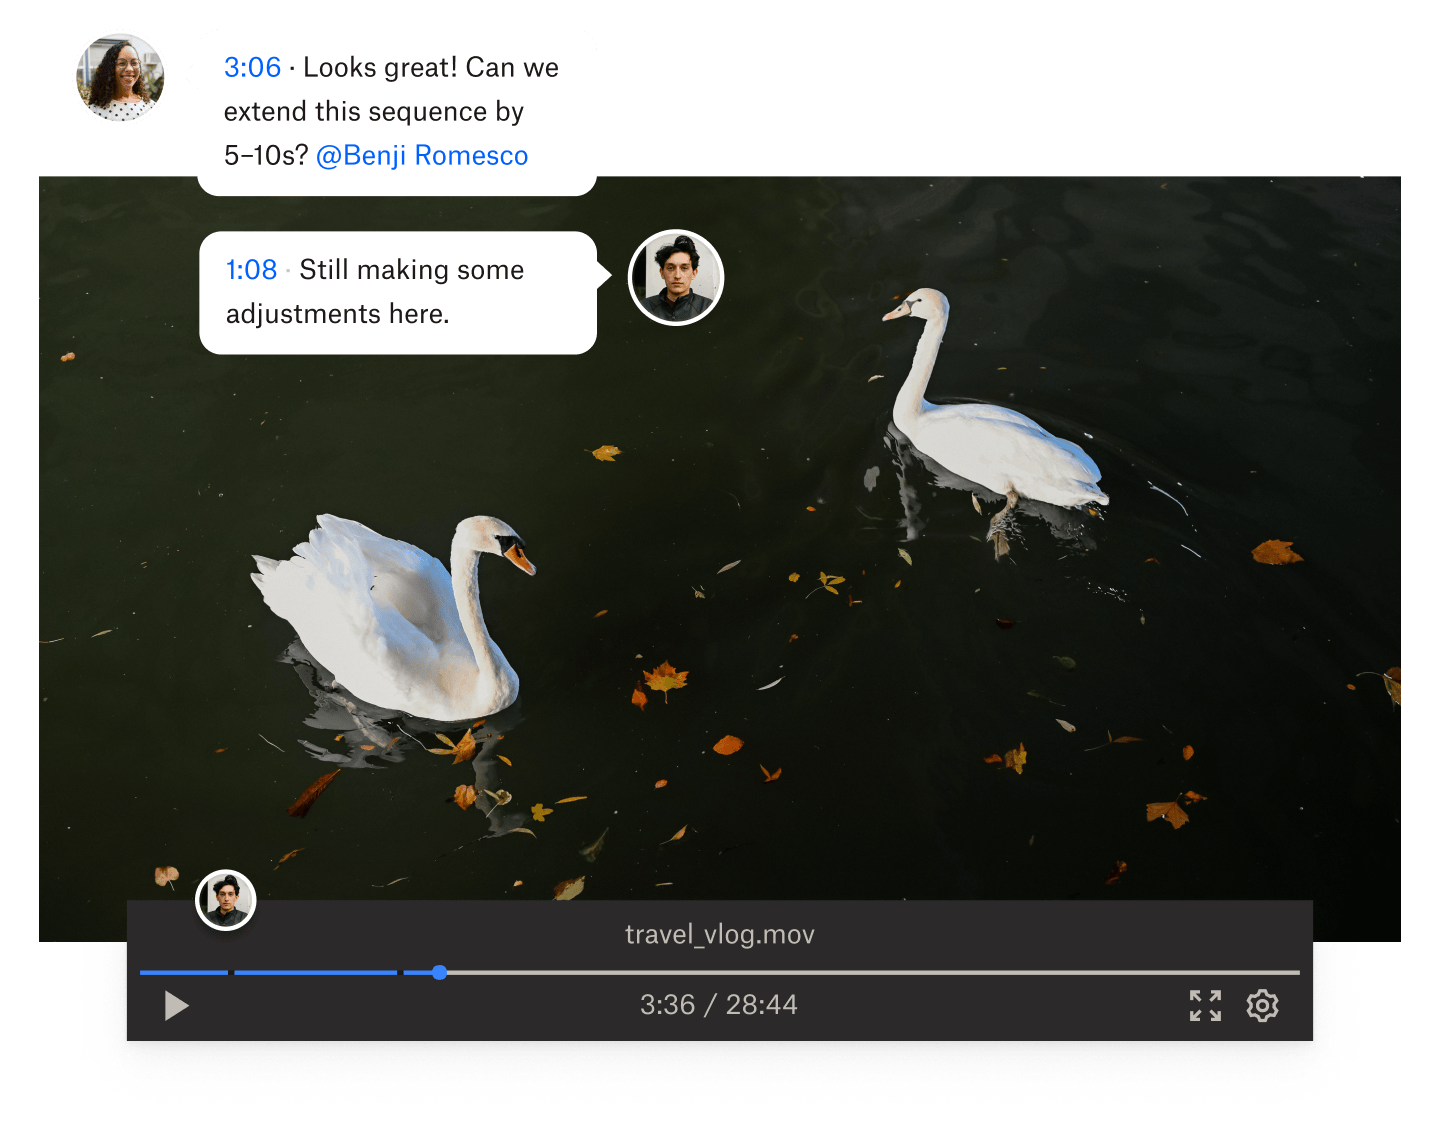 A still from a video of two swans swimming in water with time-stamped comments overlaid on the video